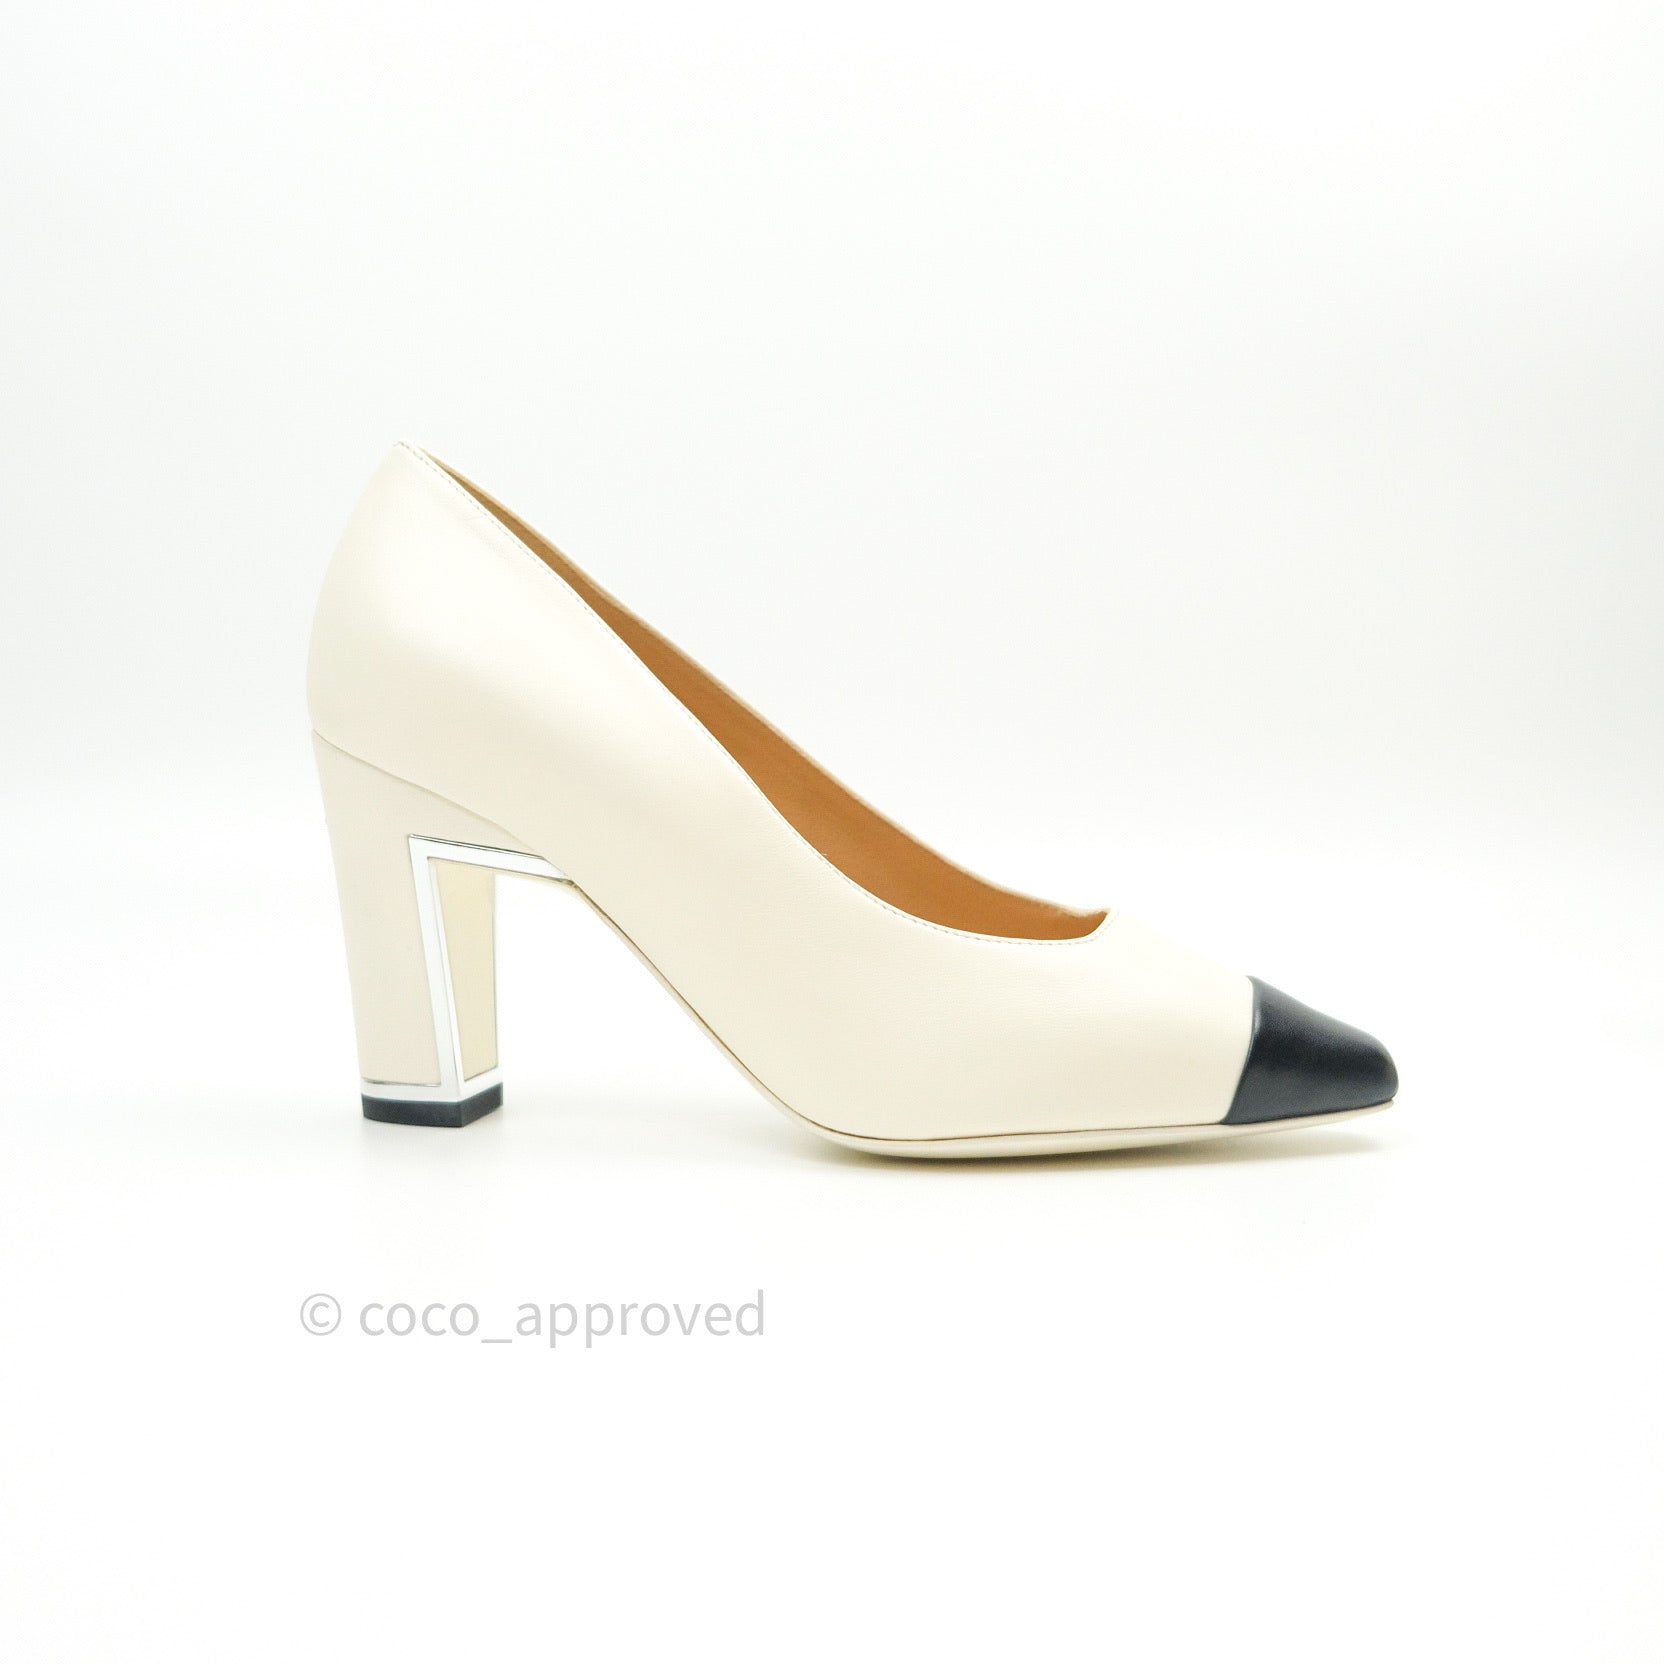 Chanel Classic Heels White Black Lambskin Shoes 36C – Coco Approved Studio